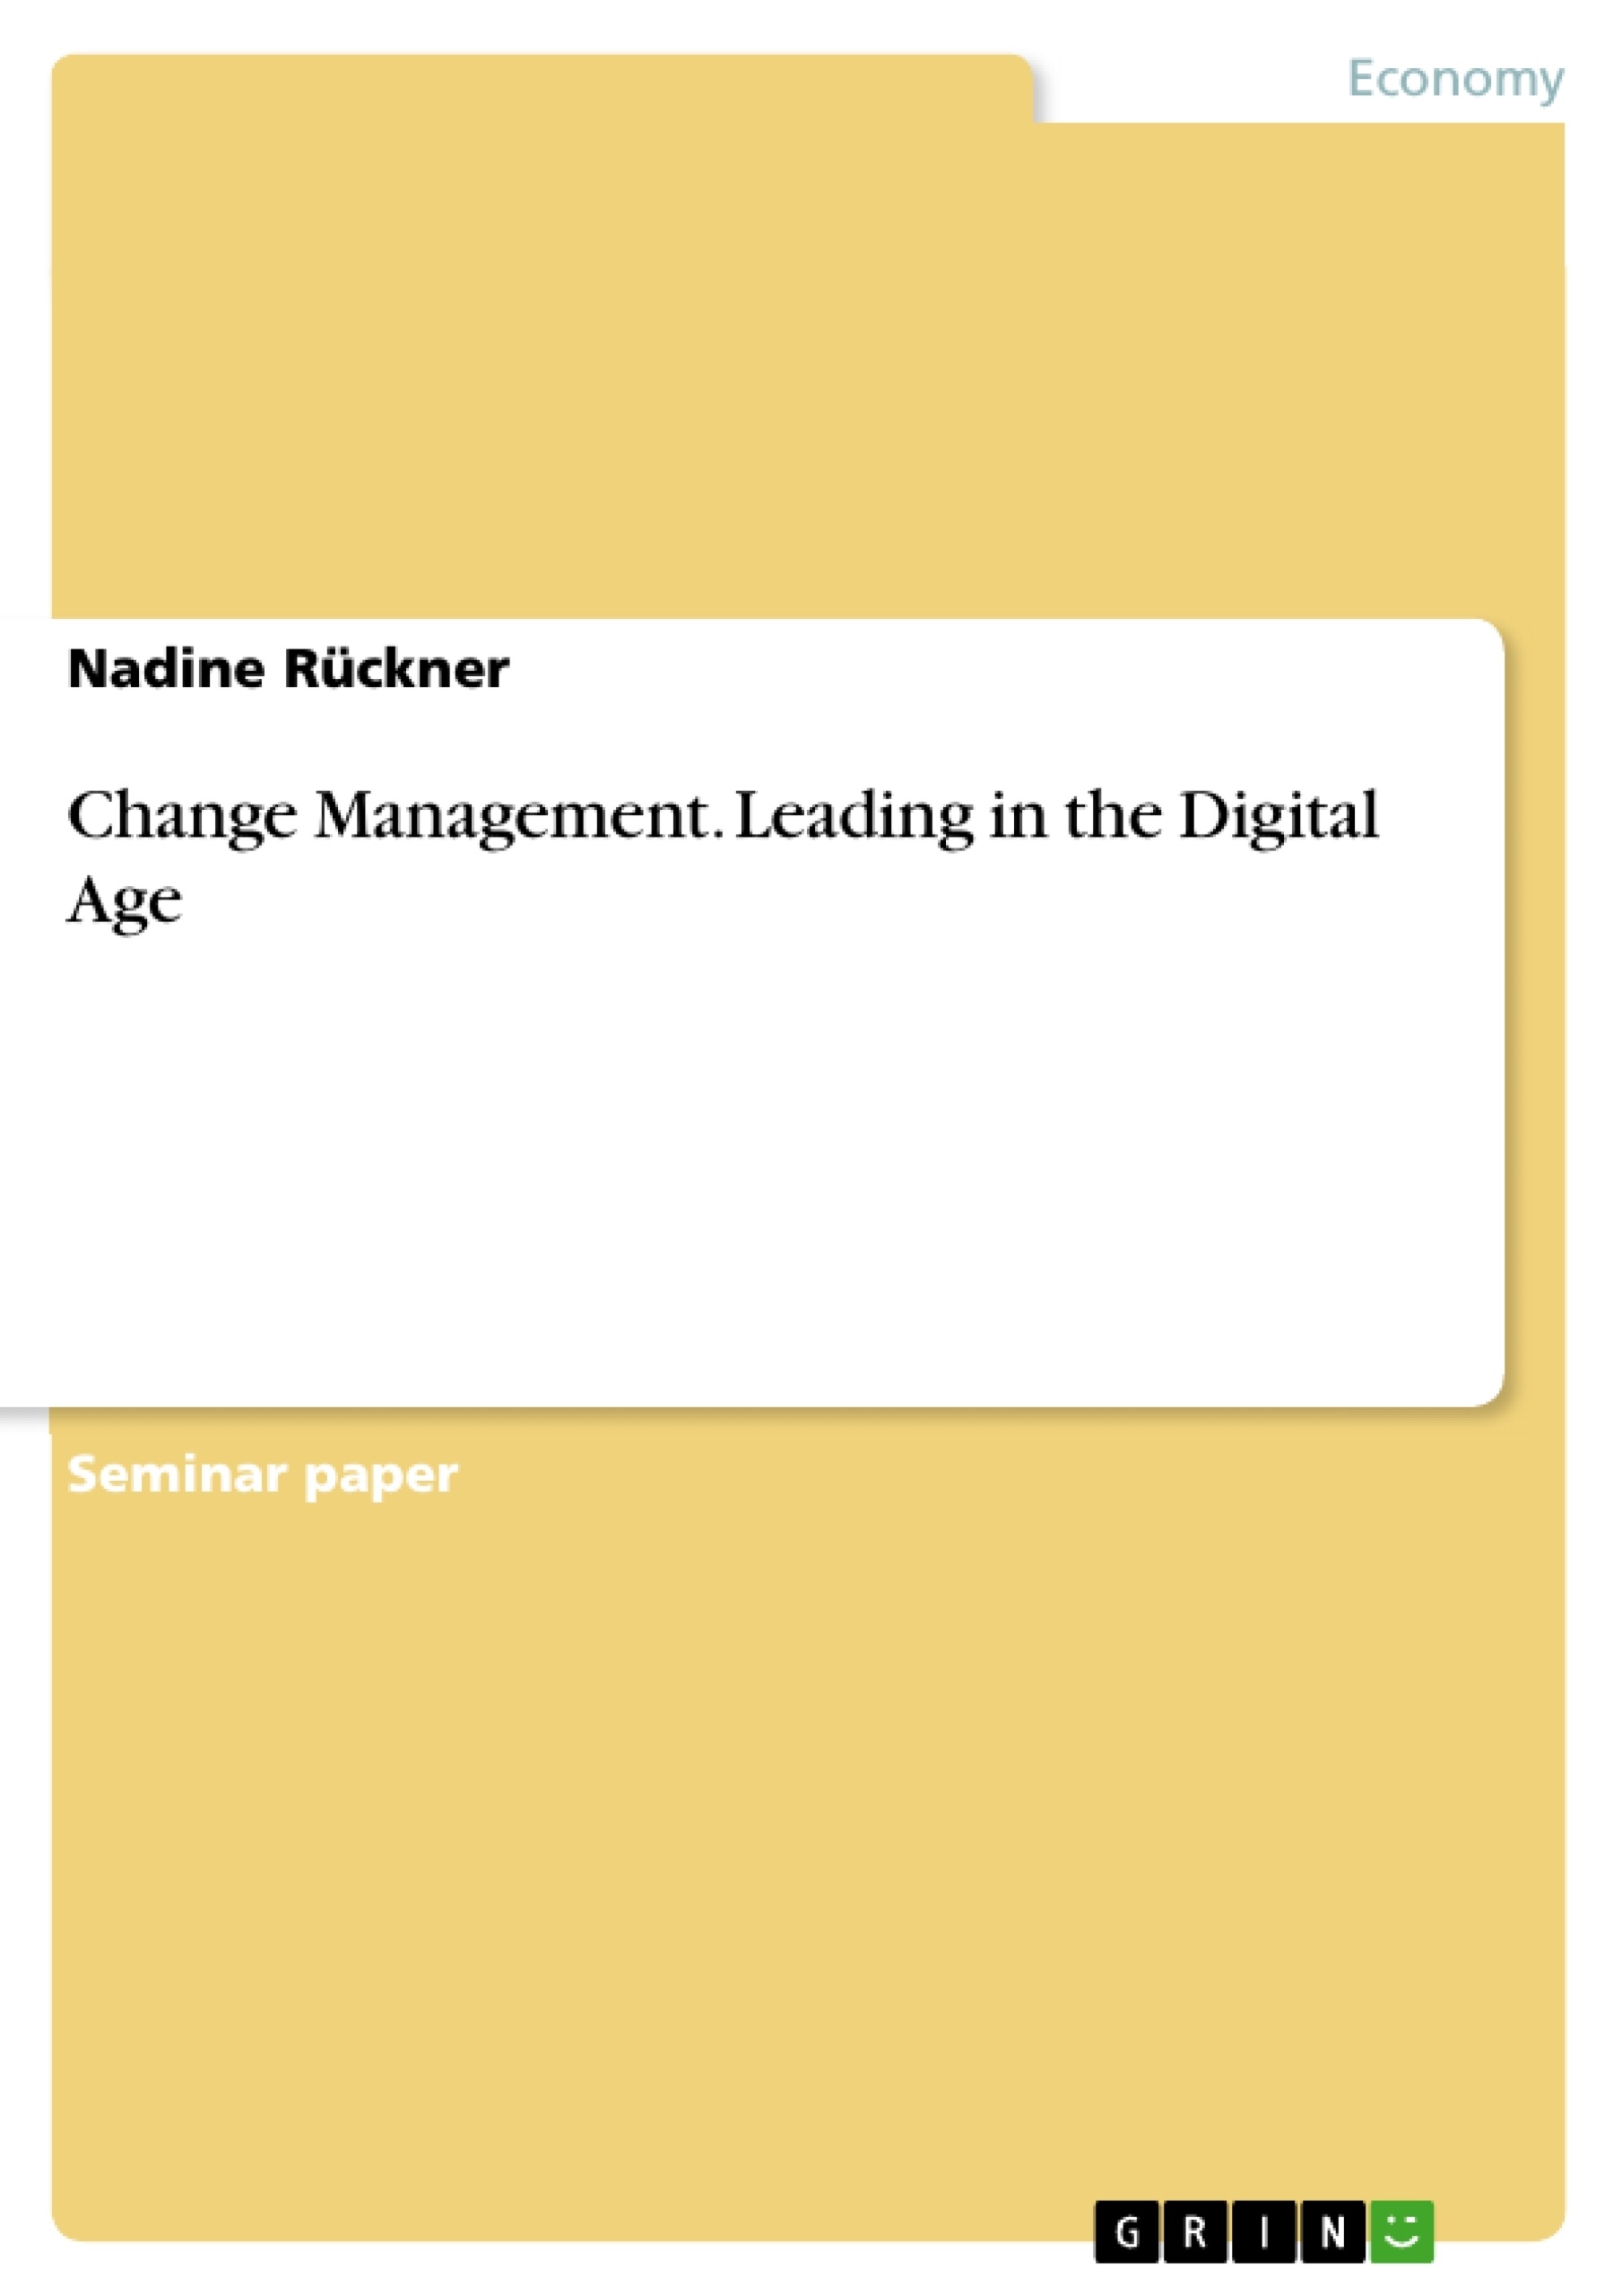 Title: Change Management. Leading in the Digital Age